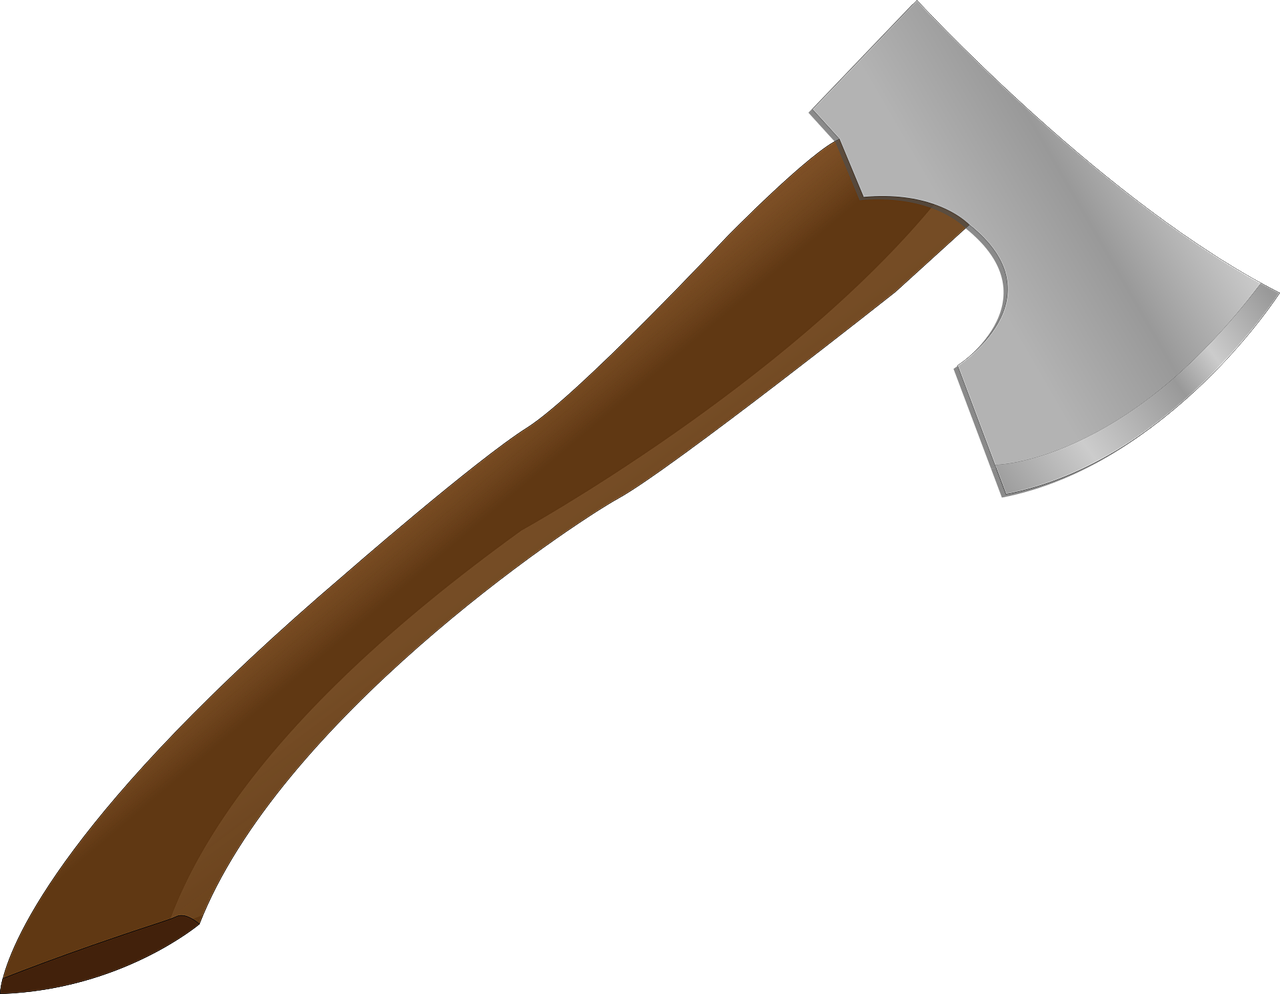 axe-4804073_1280.png